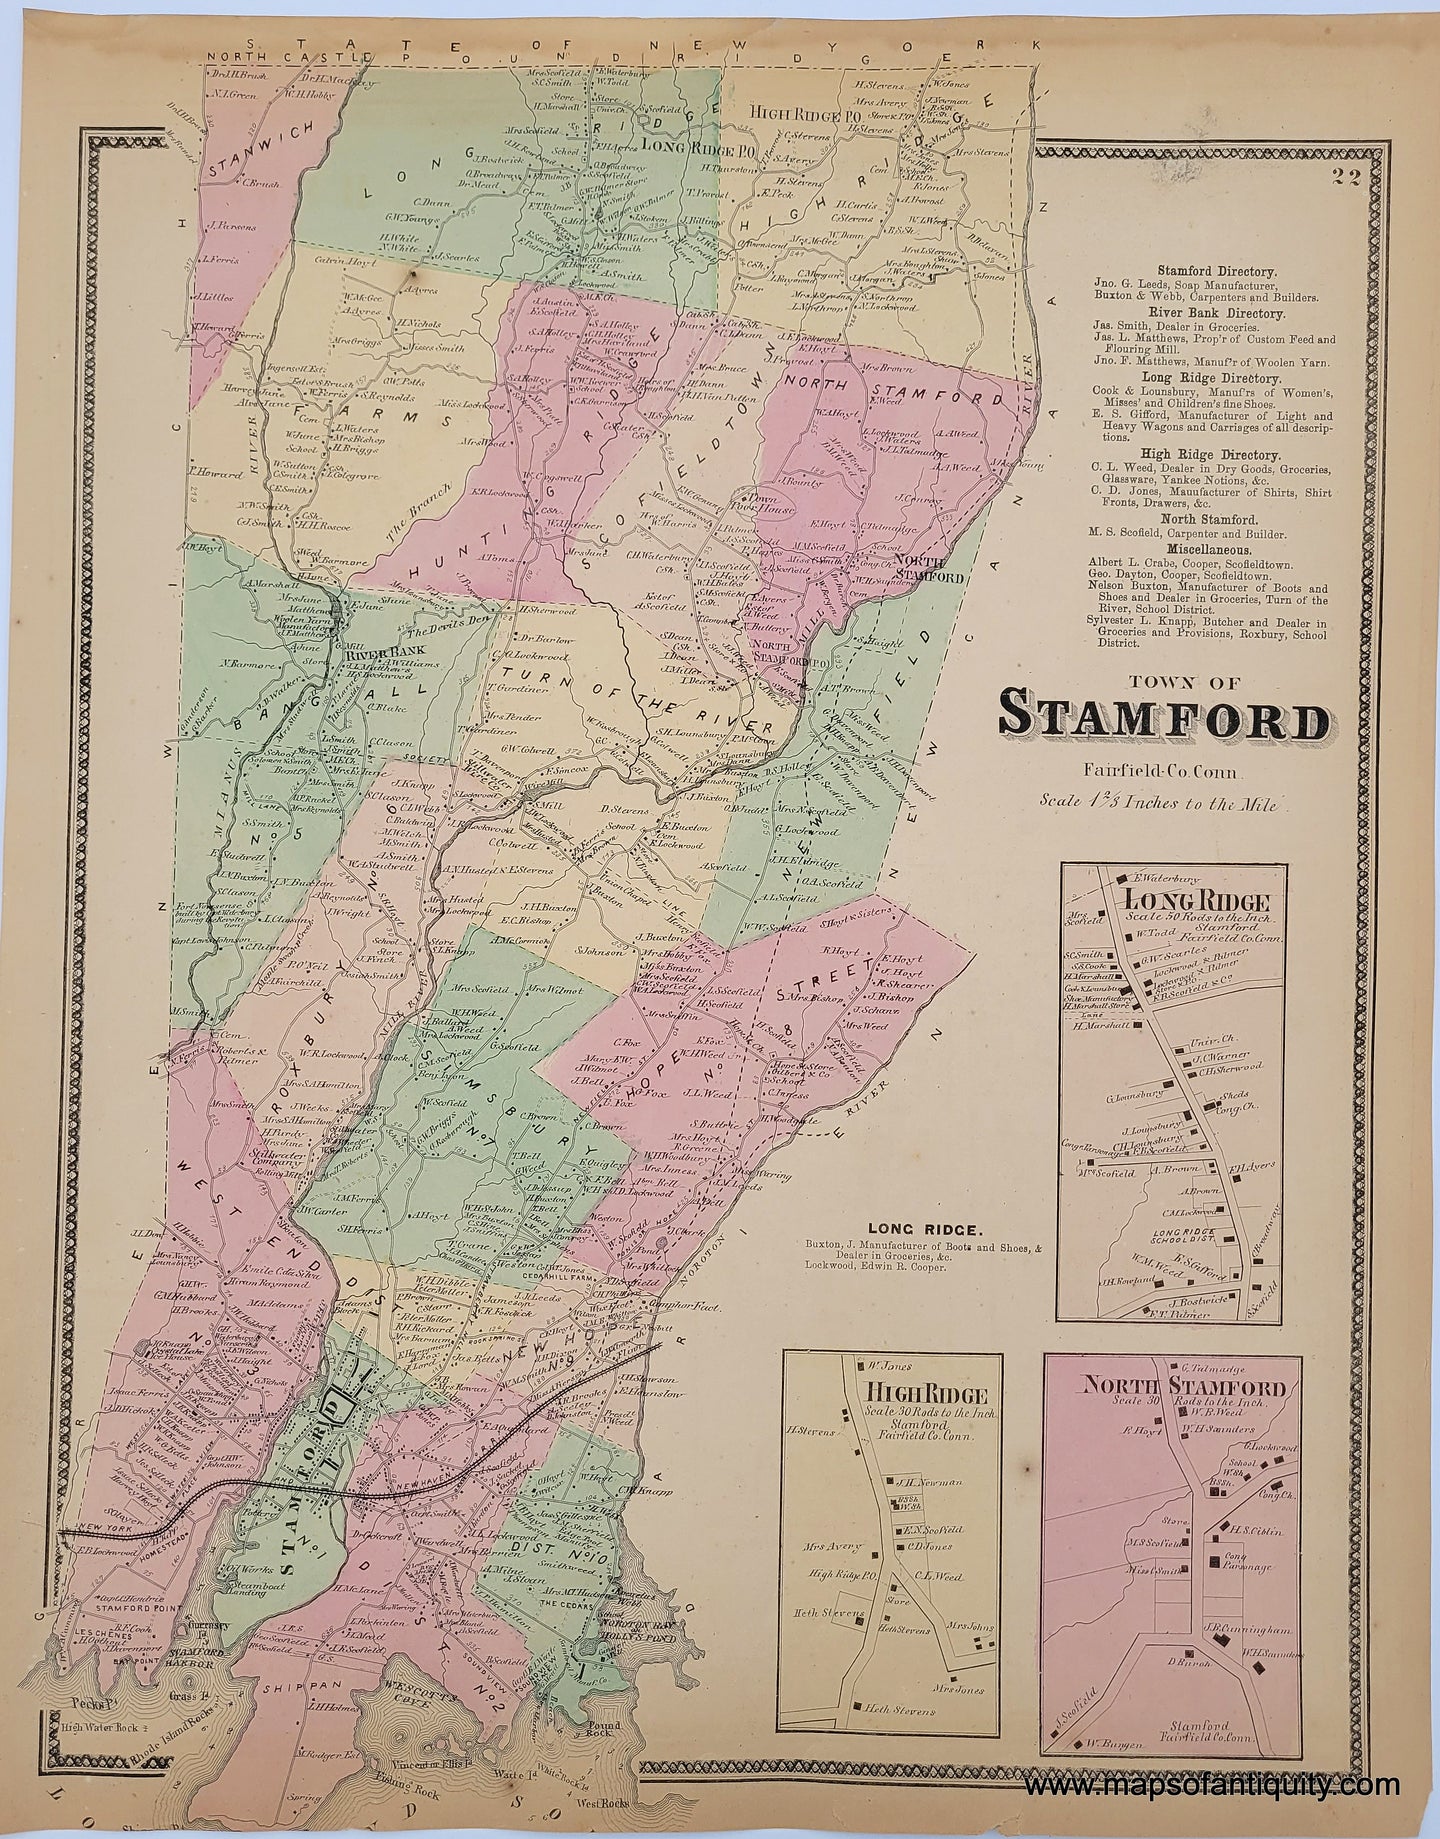 Antique-Hand-Colored-Map-Town-of-Stamford-(CT)--United-States-Northeast-1867-Beers-Maps-Of-Antiquity